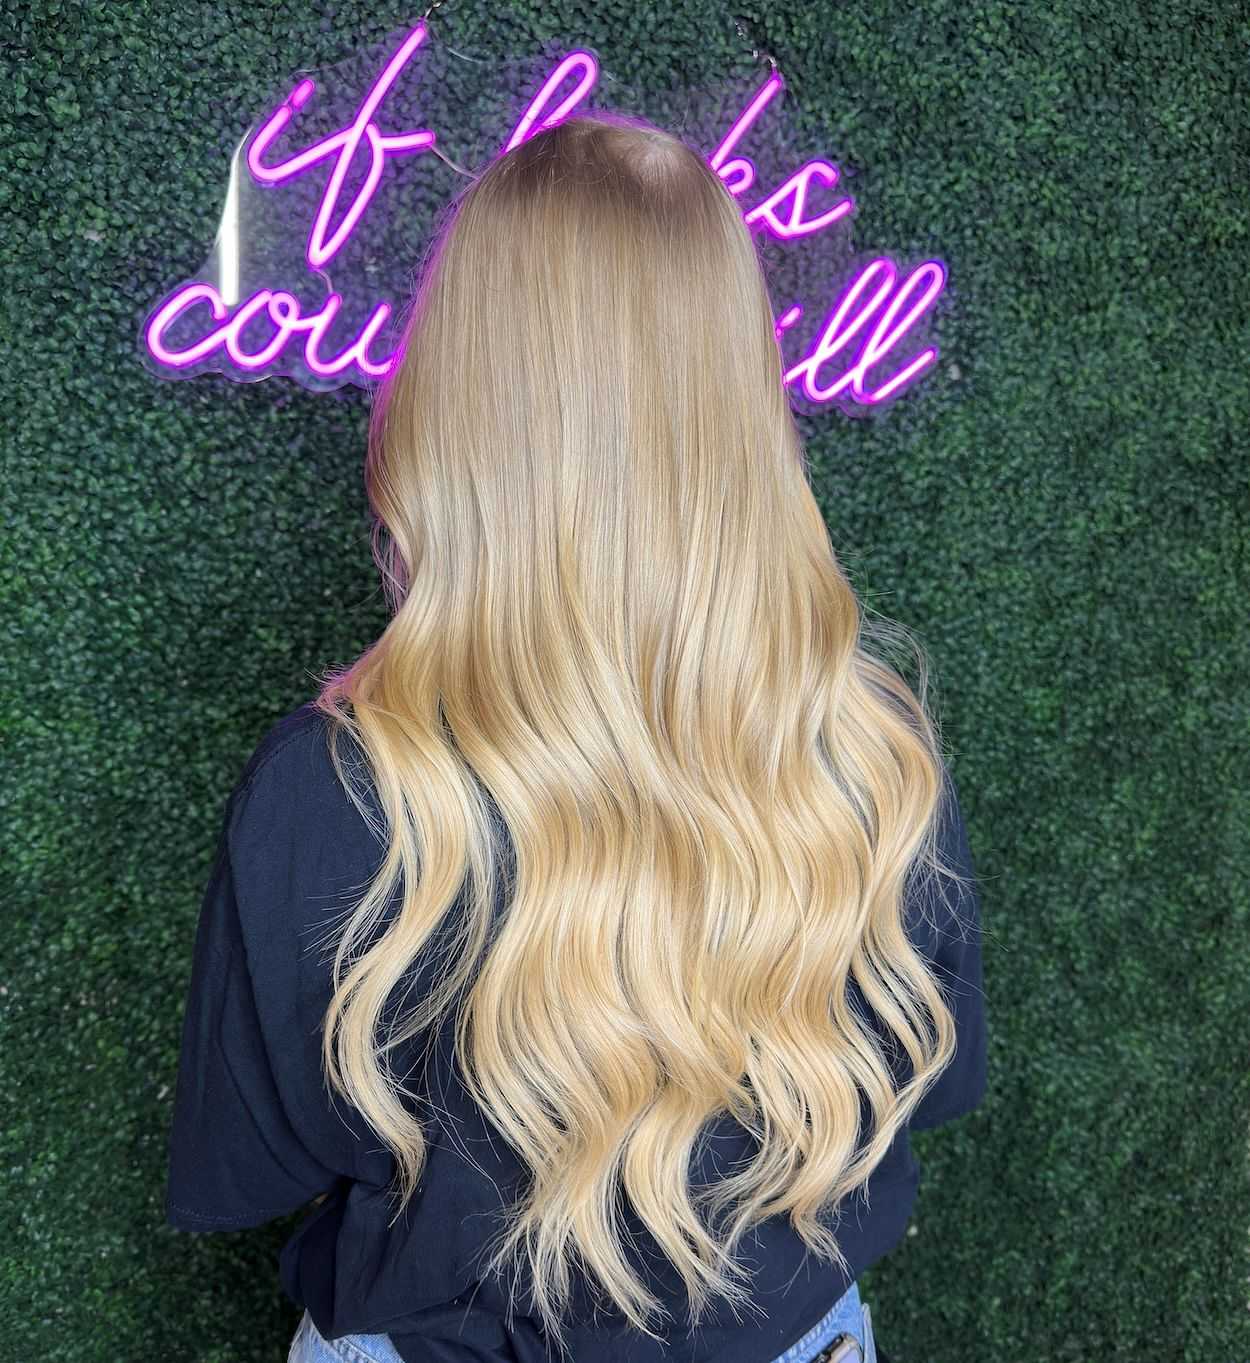 Woman with long blonde wavy hair against a neon sign background.